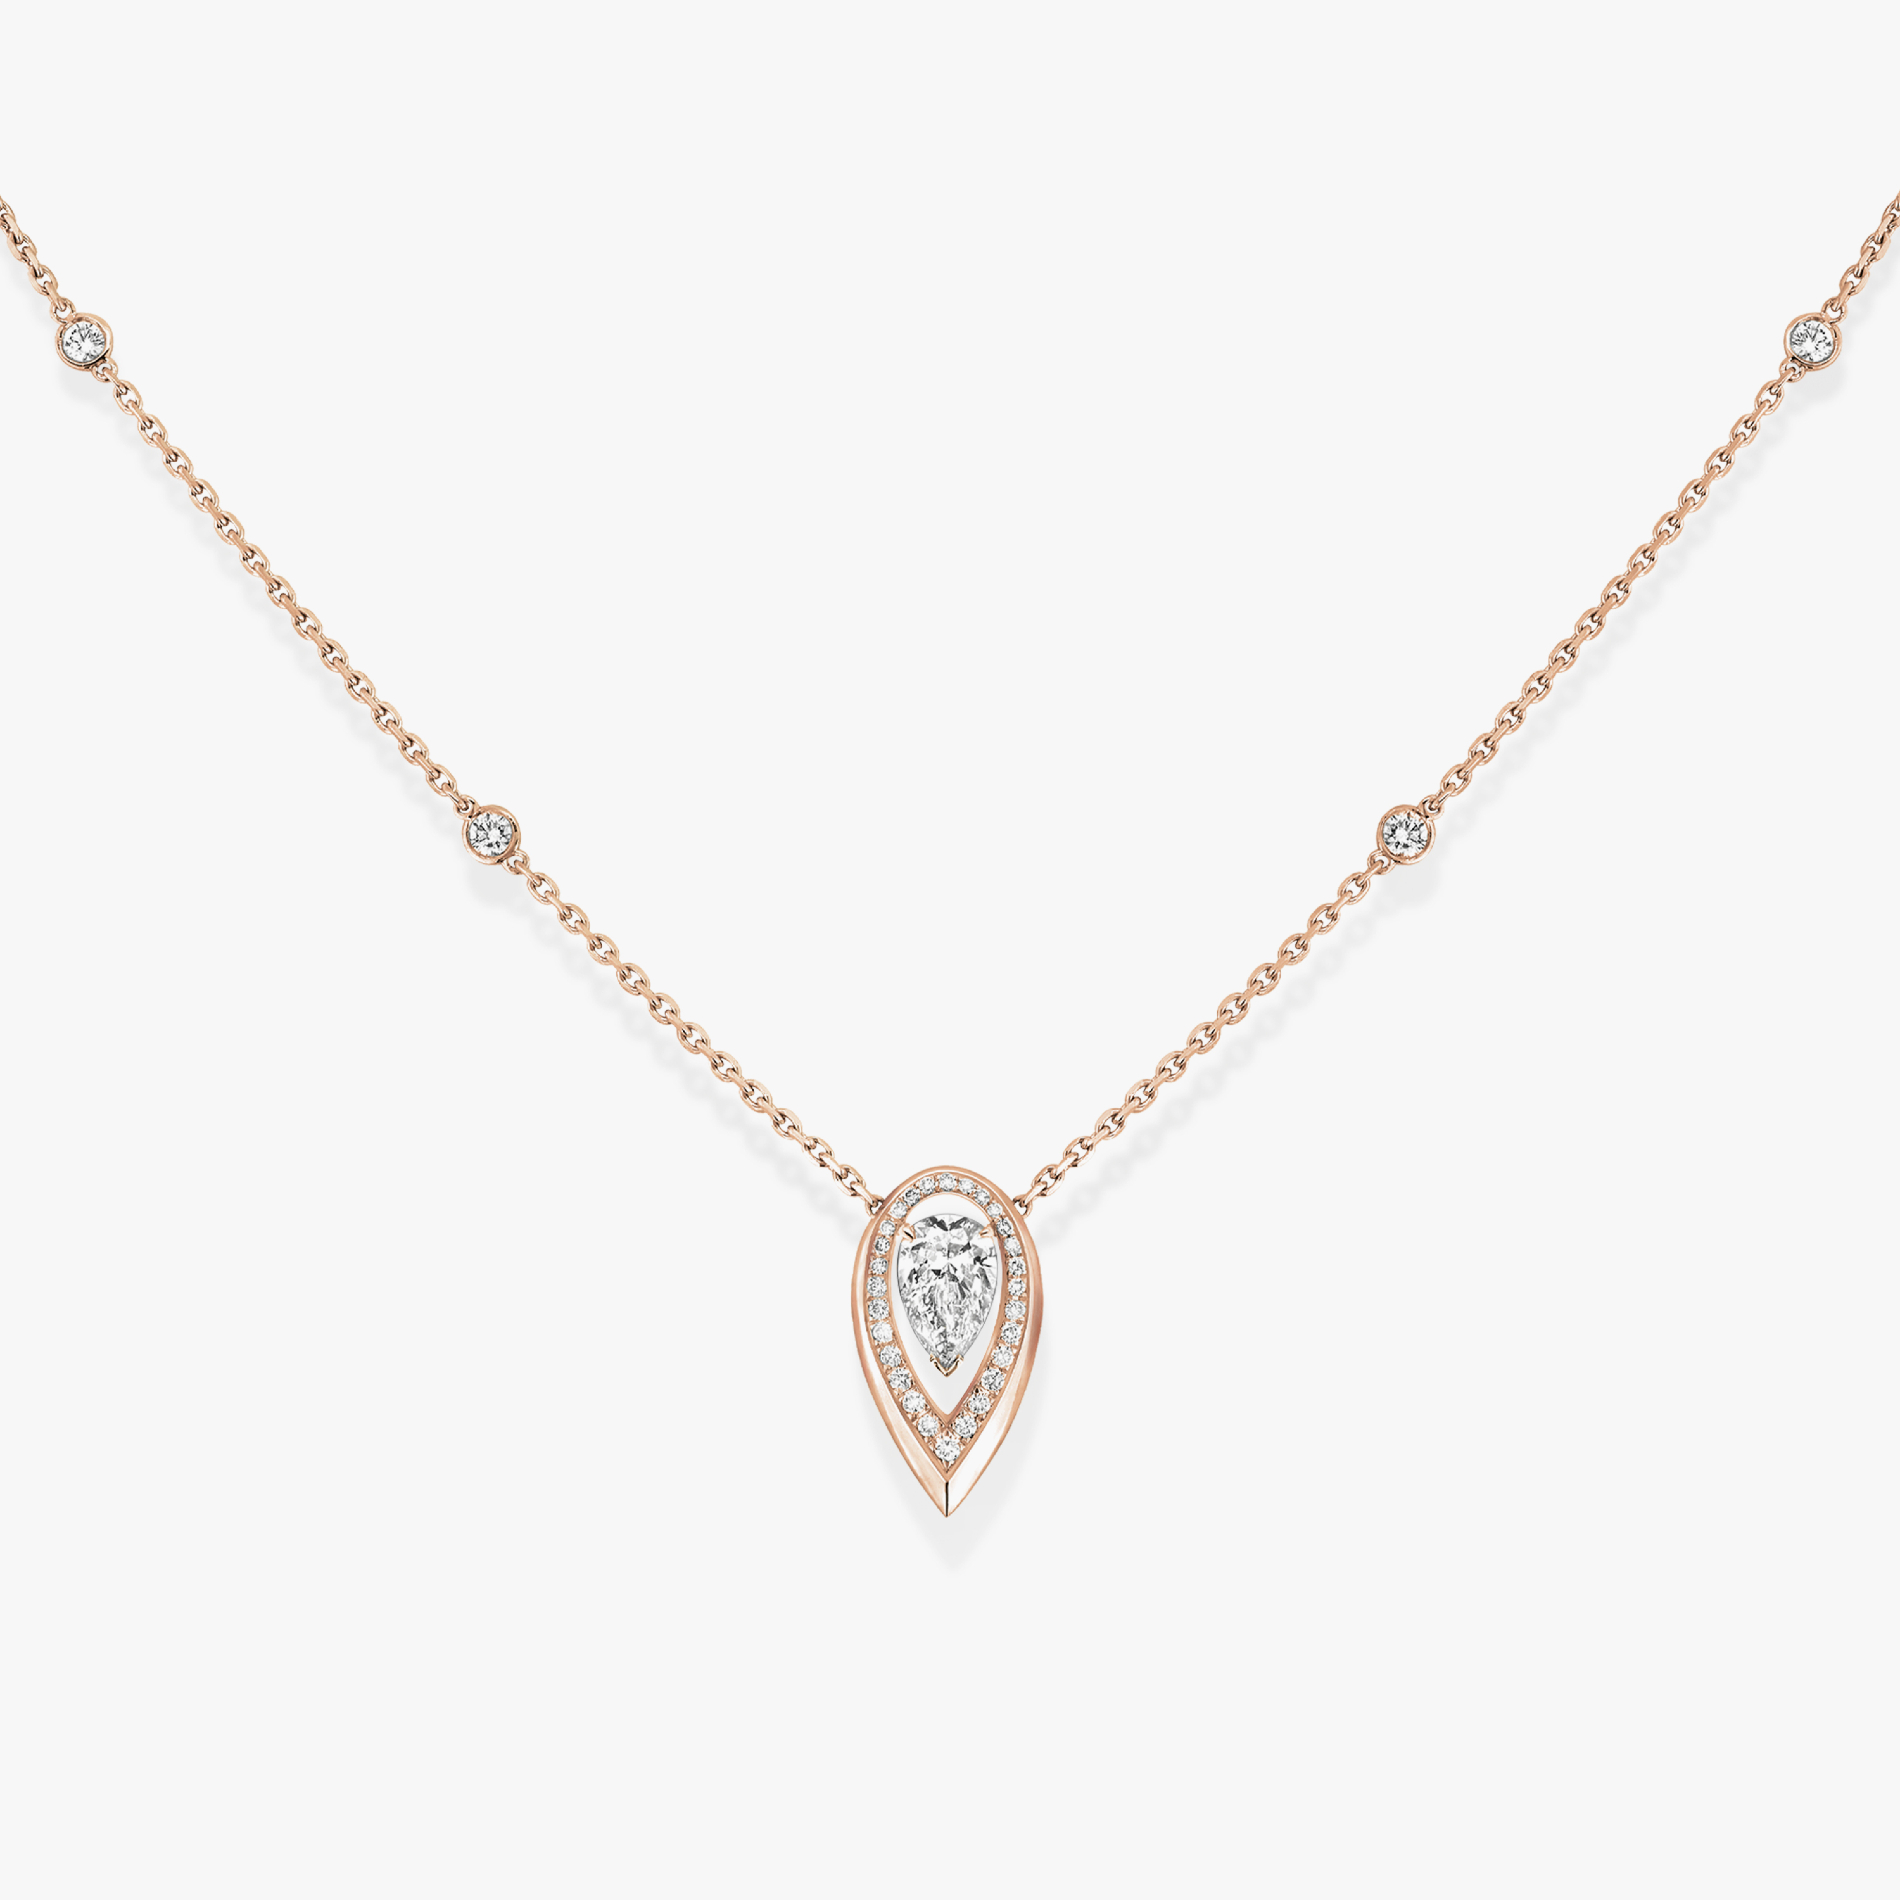 Necklace For Her Pink Gold Diamond Fiery 0.25ct 13239-PG